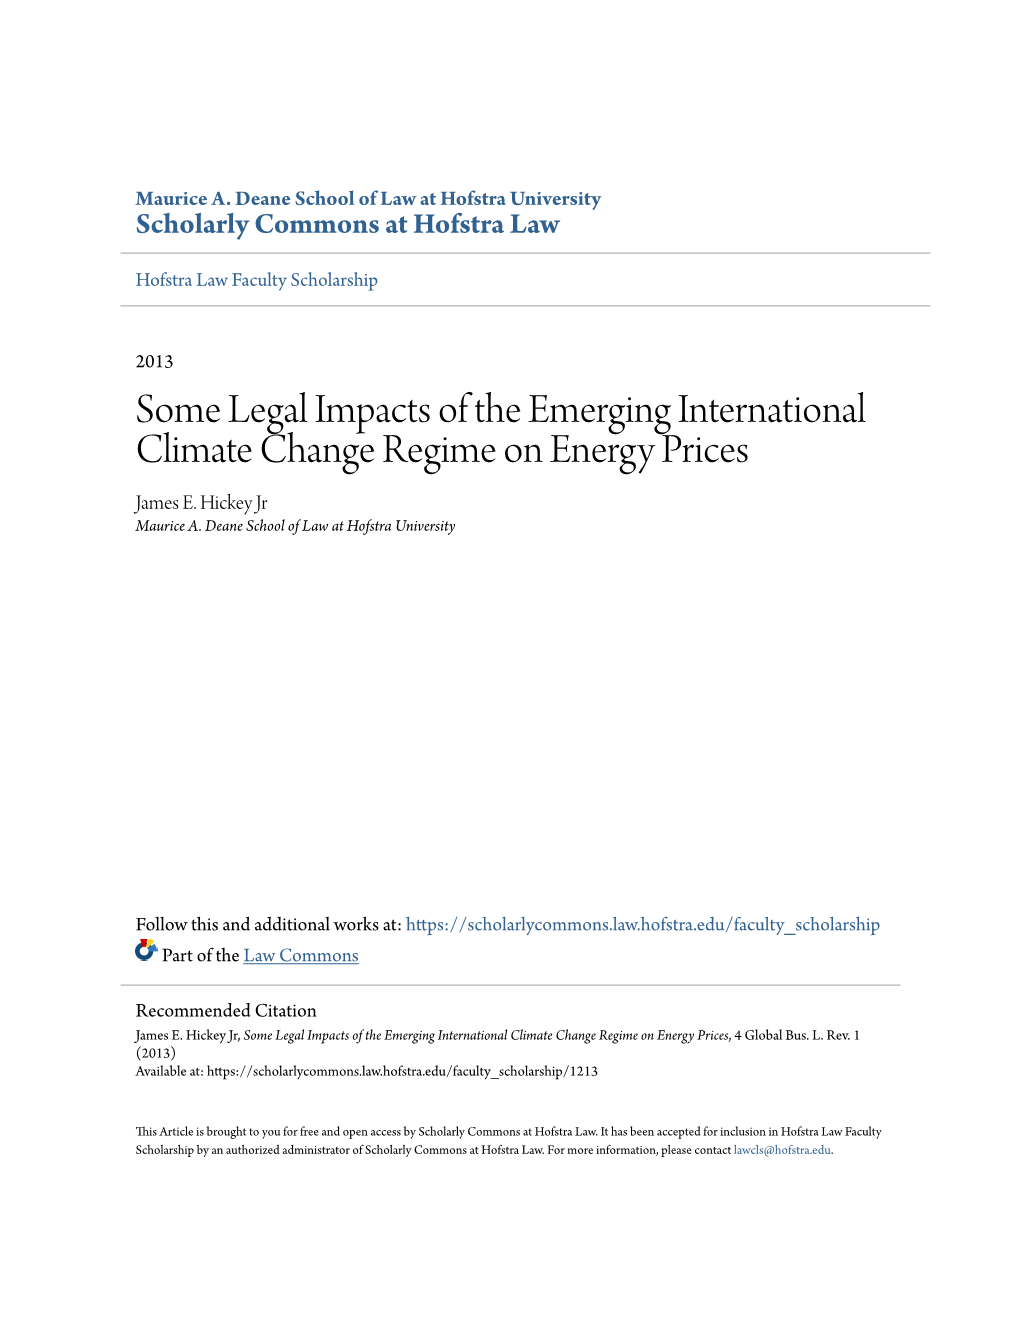 Some Legal Impacts of the Emerging International Climate Change Regime on Energy Prices James E